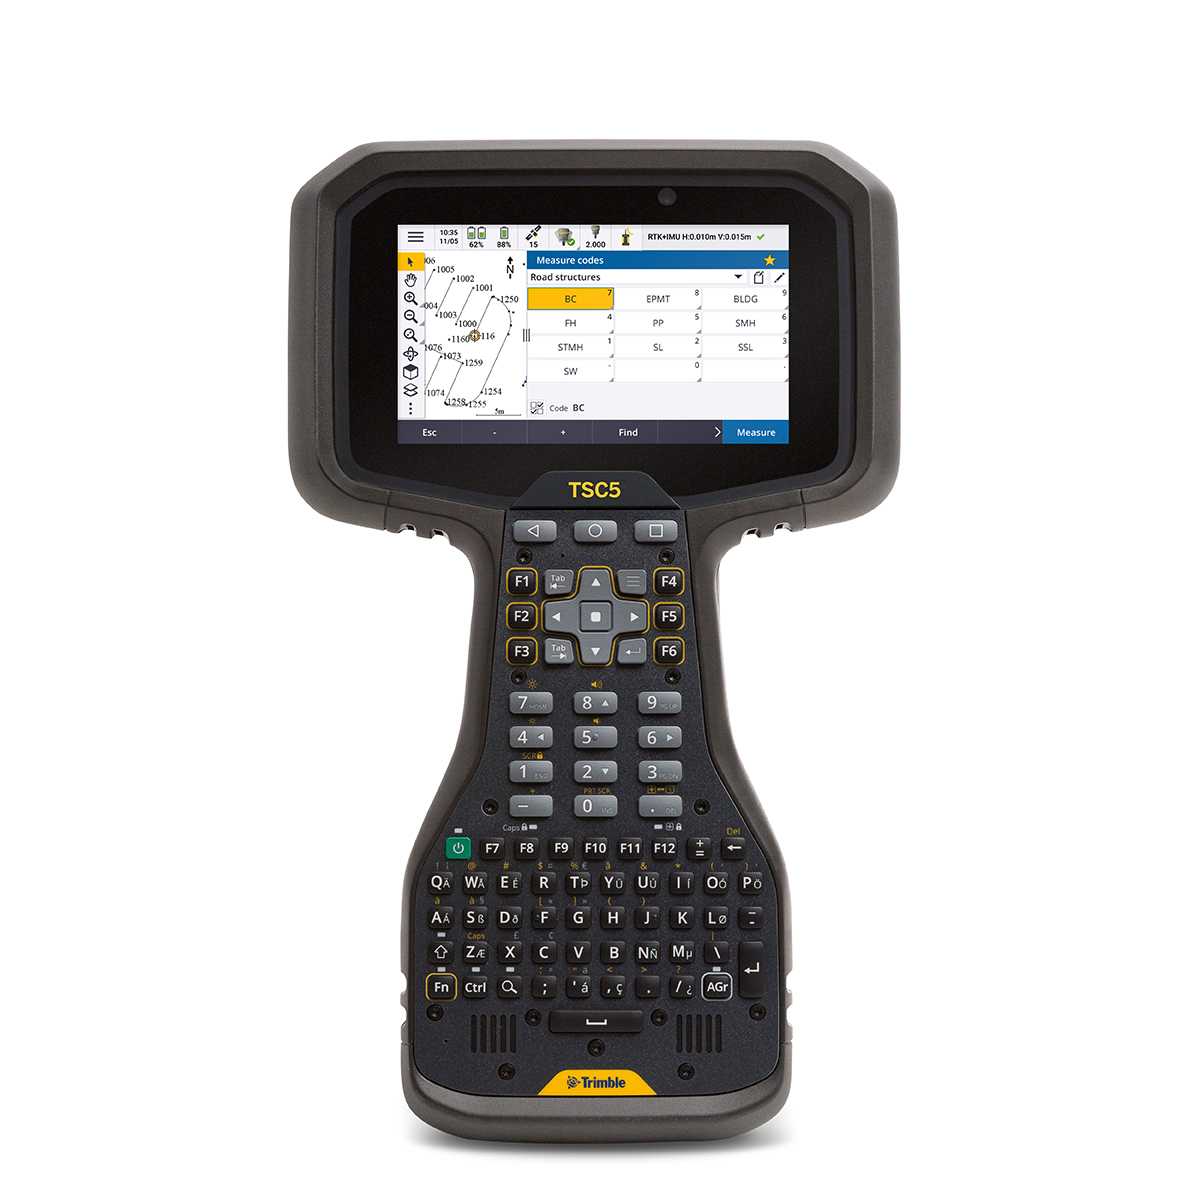 Trimble TSC5 Equipment with software displayed